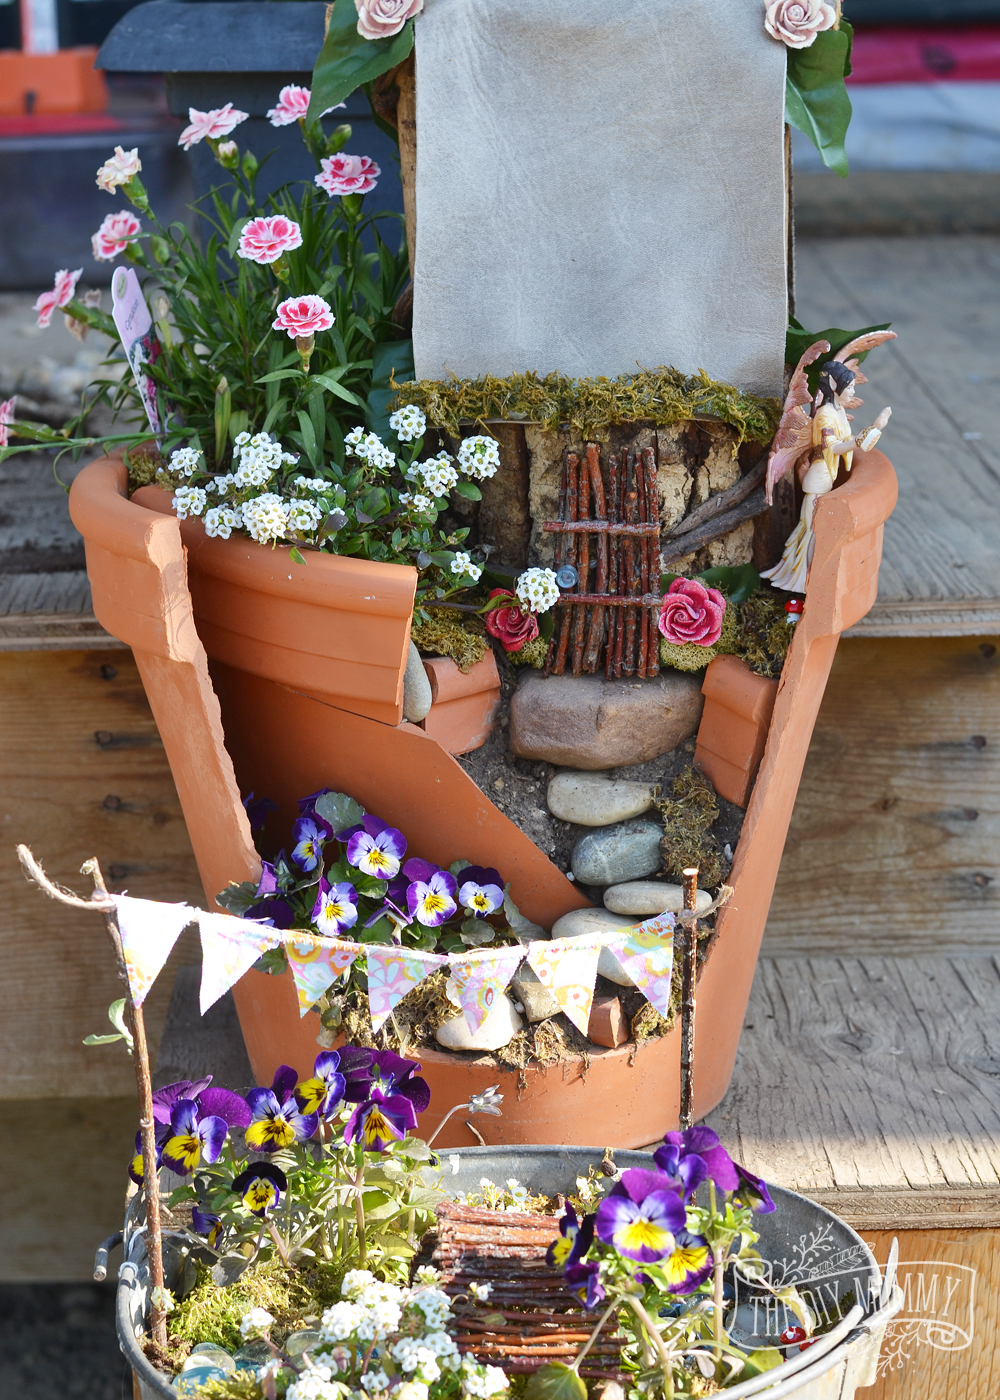 Easy + Inexpensive Fairy Garden: A broken pot, some props made of sticks, and some imagination make a sweet potted fairy garden that doesn't break the bank!